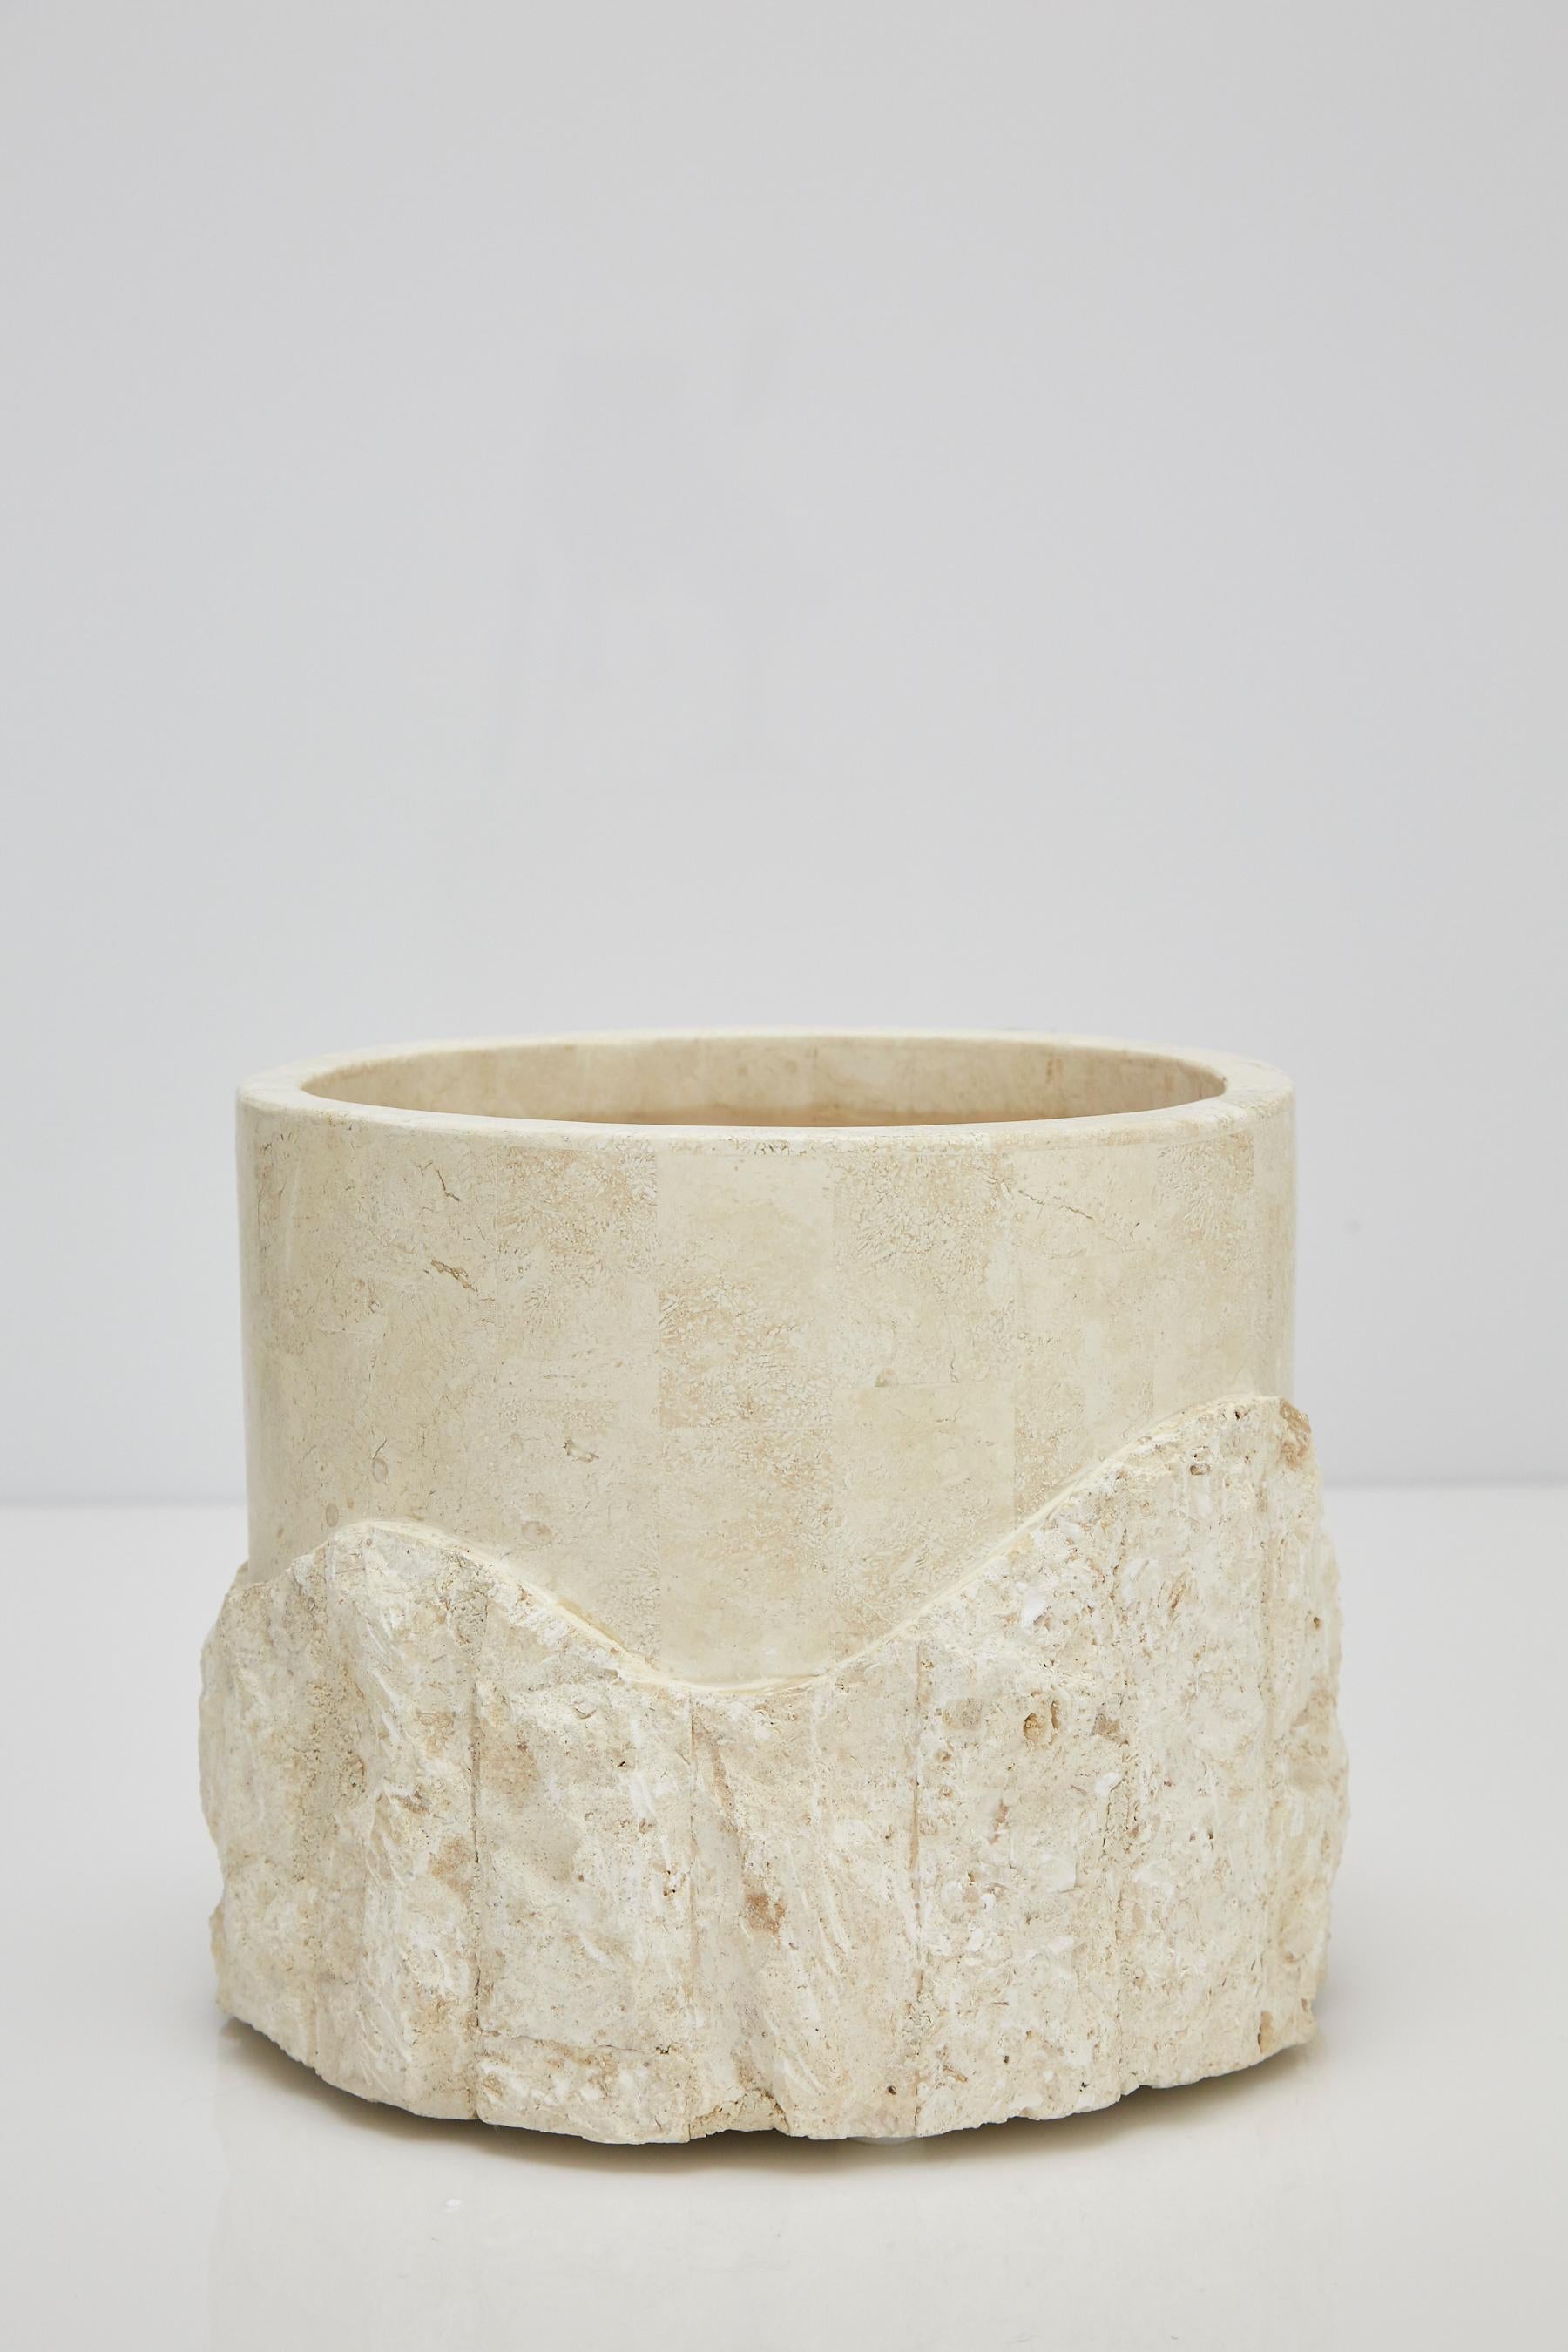 Small Round Postmodern Tessellated Stone Rough and Smooth Planter, 1990s In Excellent Condition For Sale In Los Angeles, CA